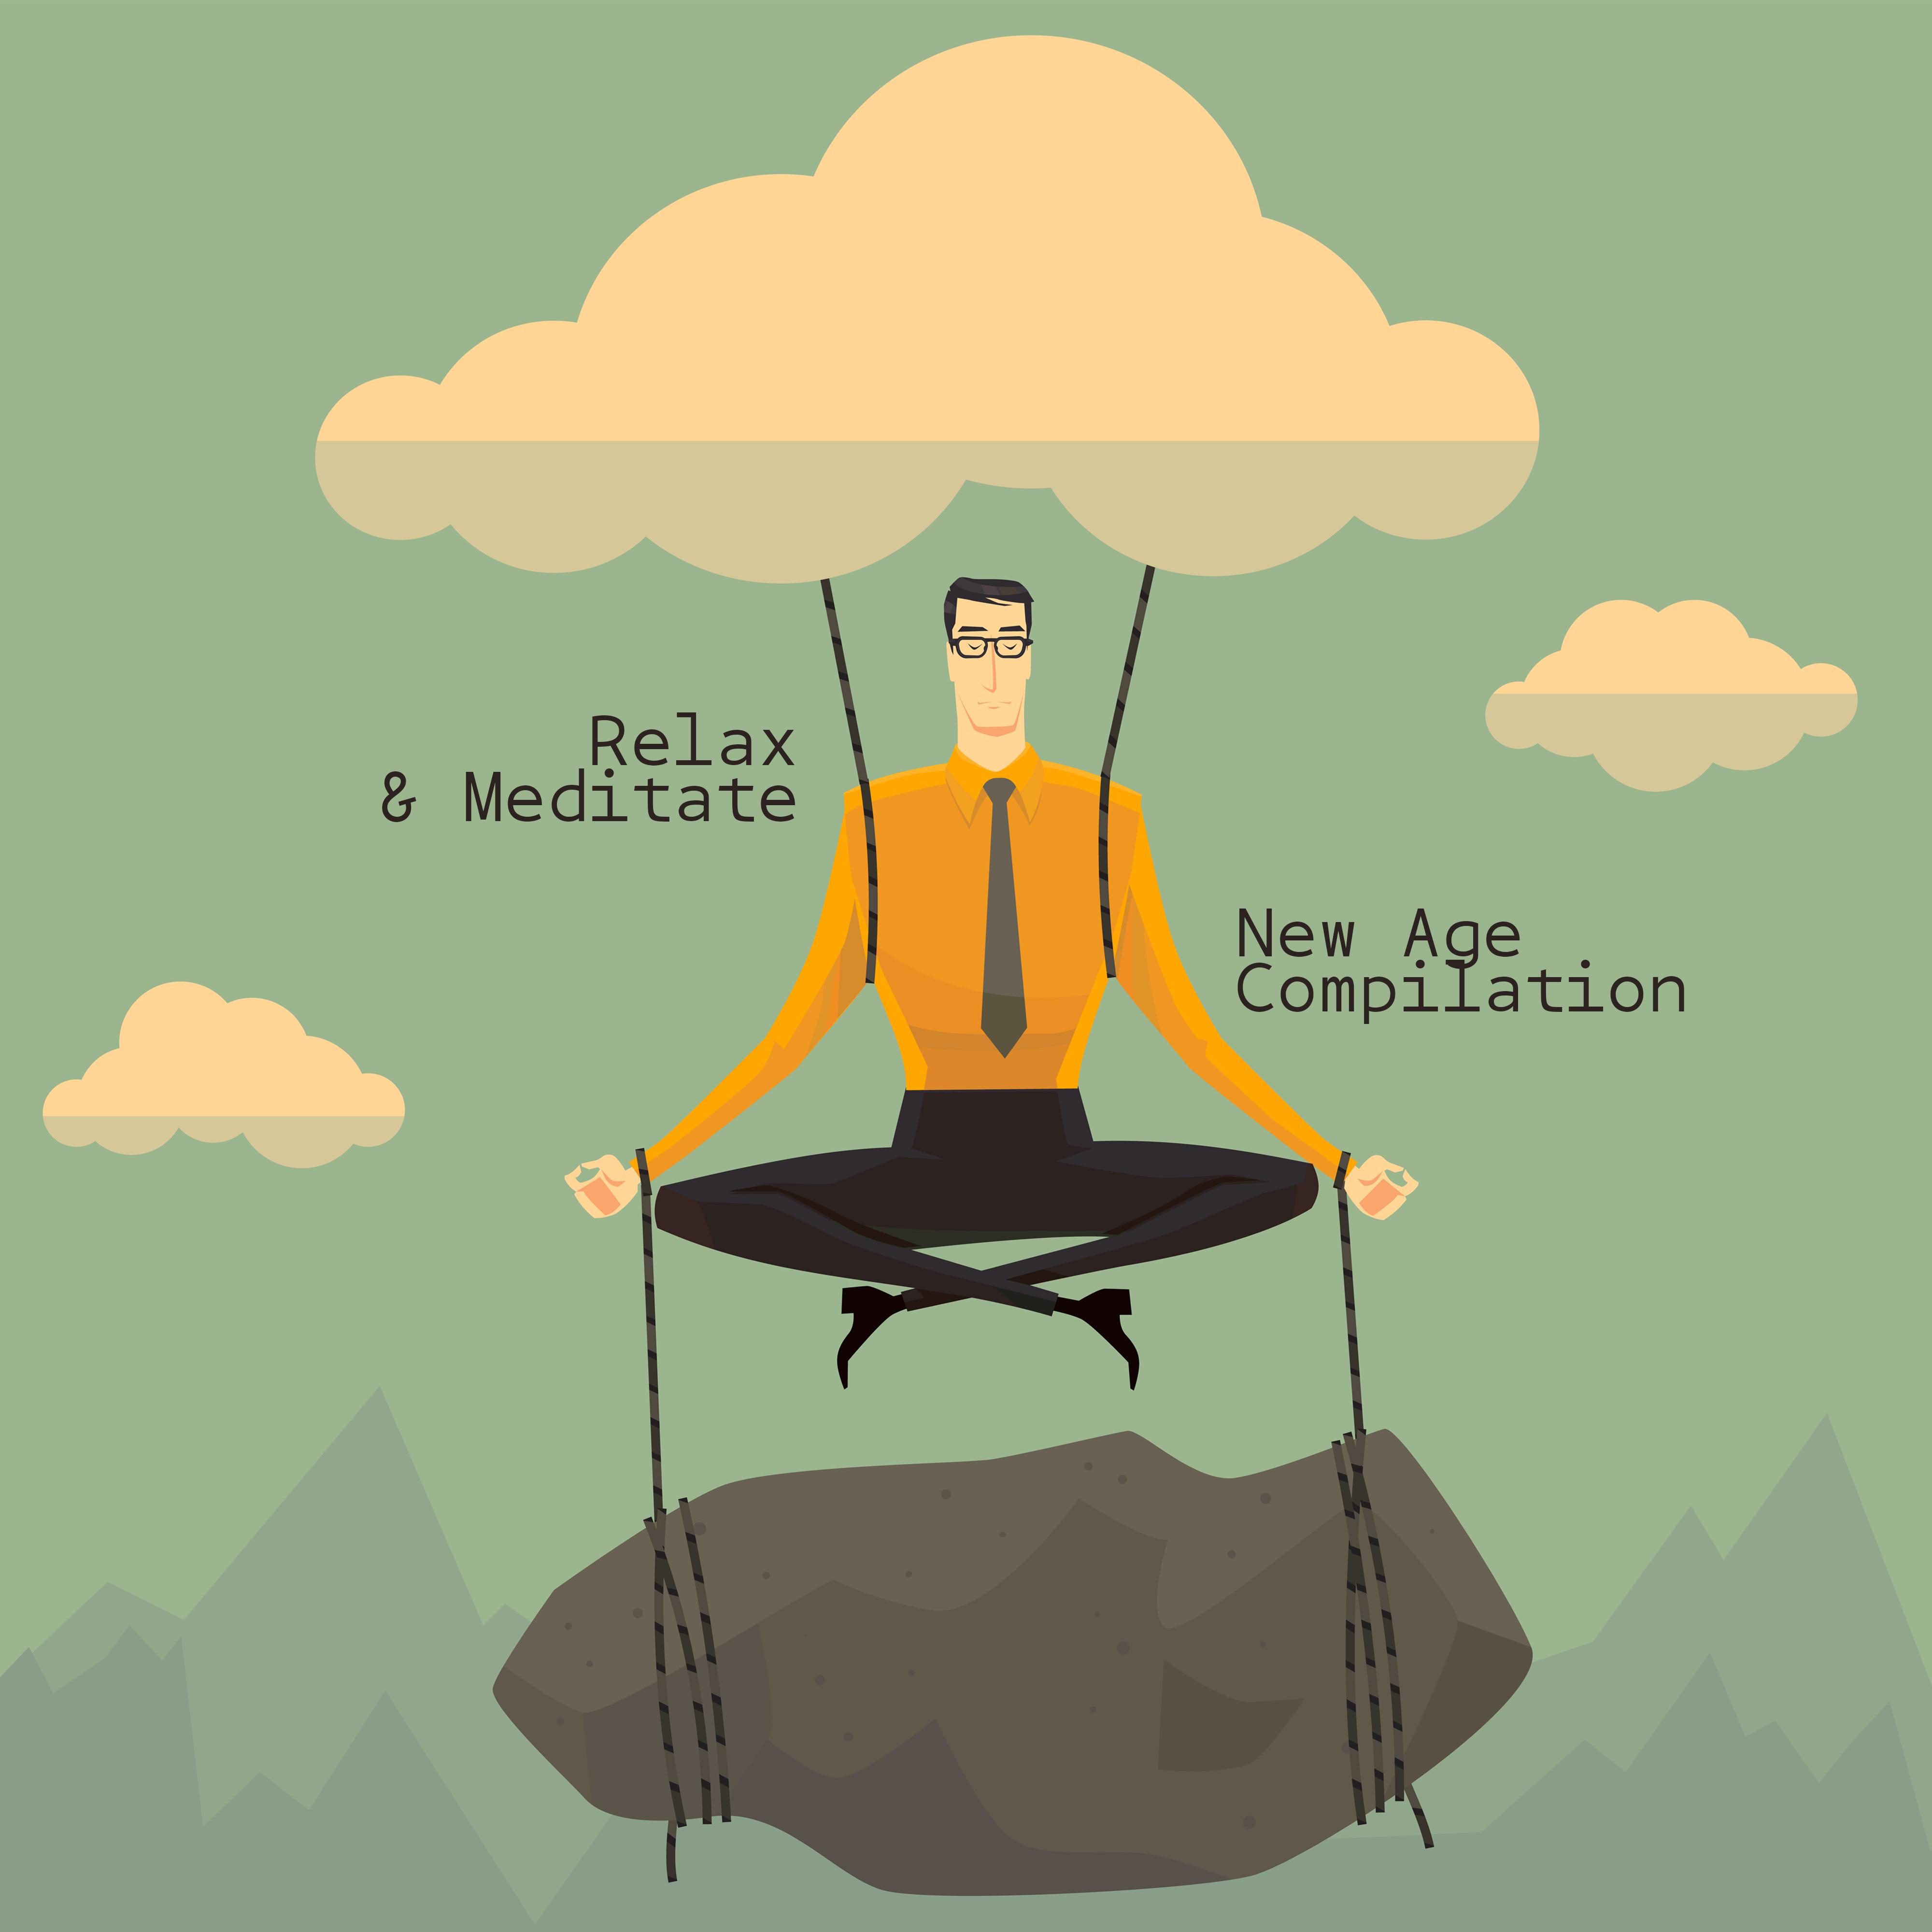 Relax & Meditate New Age Compilation: 15 Soothing Tracks for Yoga & Energy Regeneration Relax